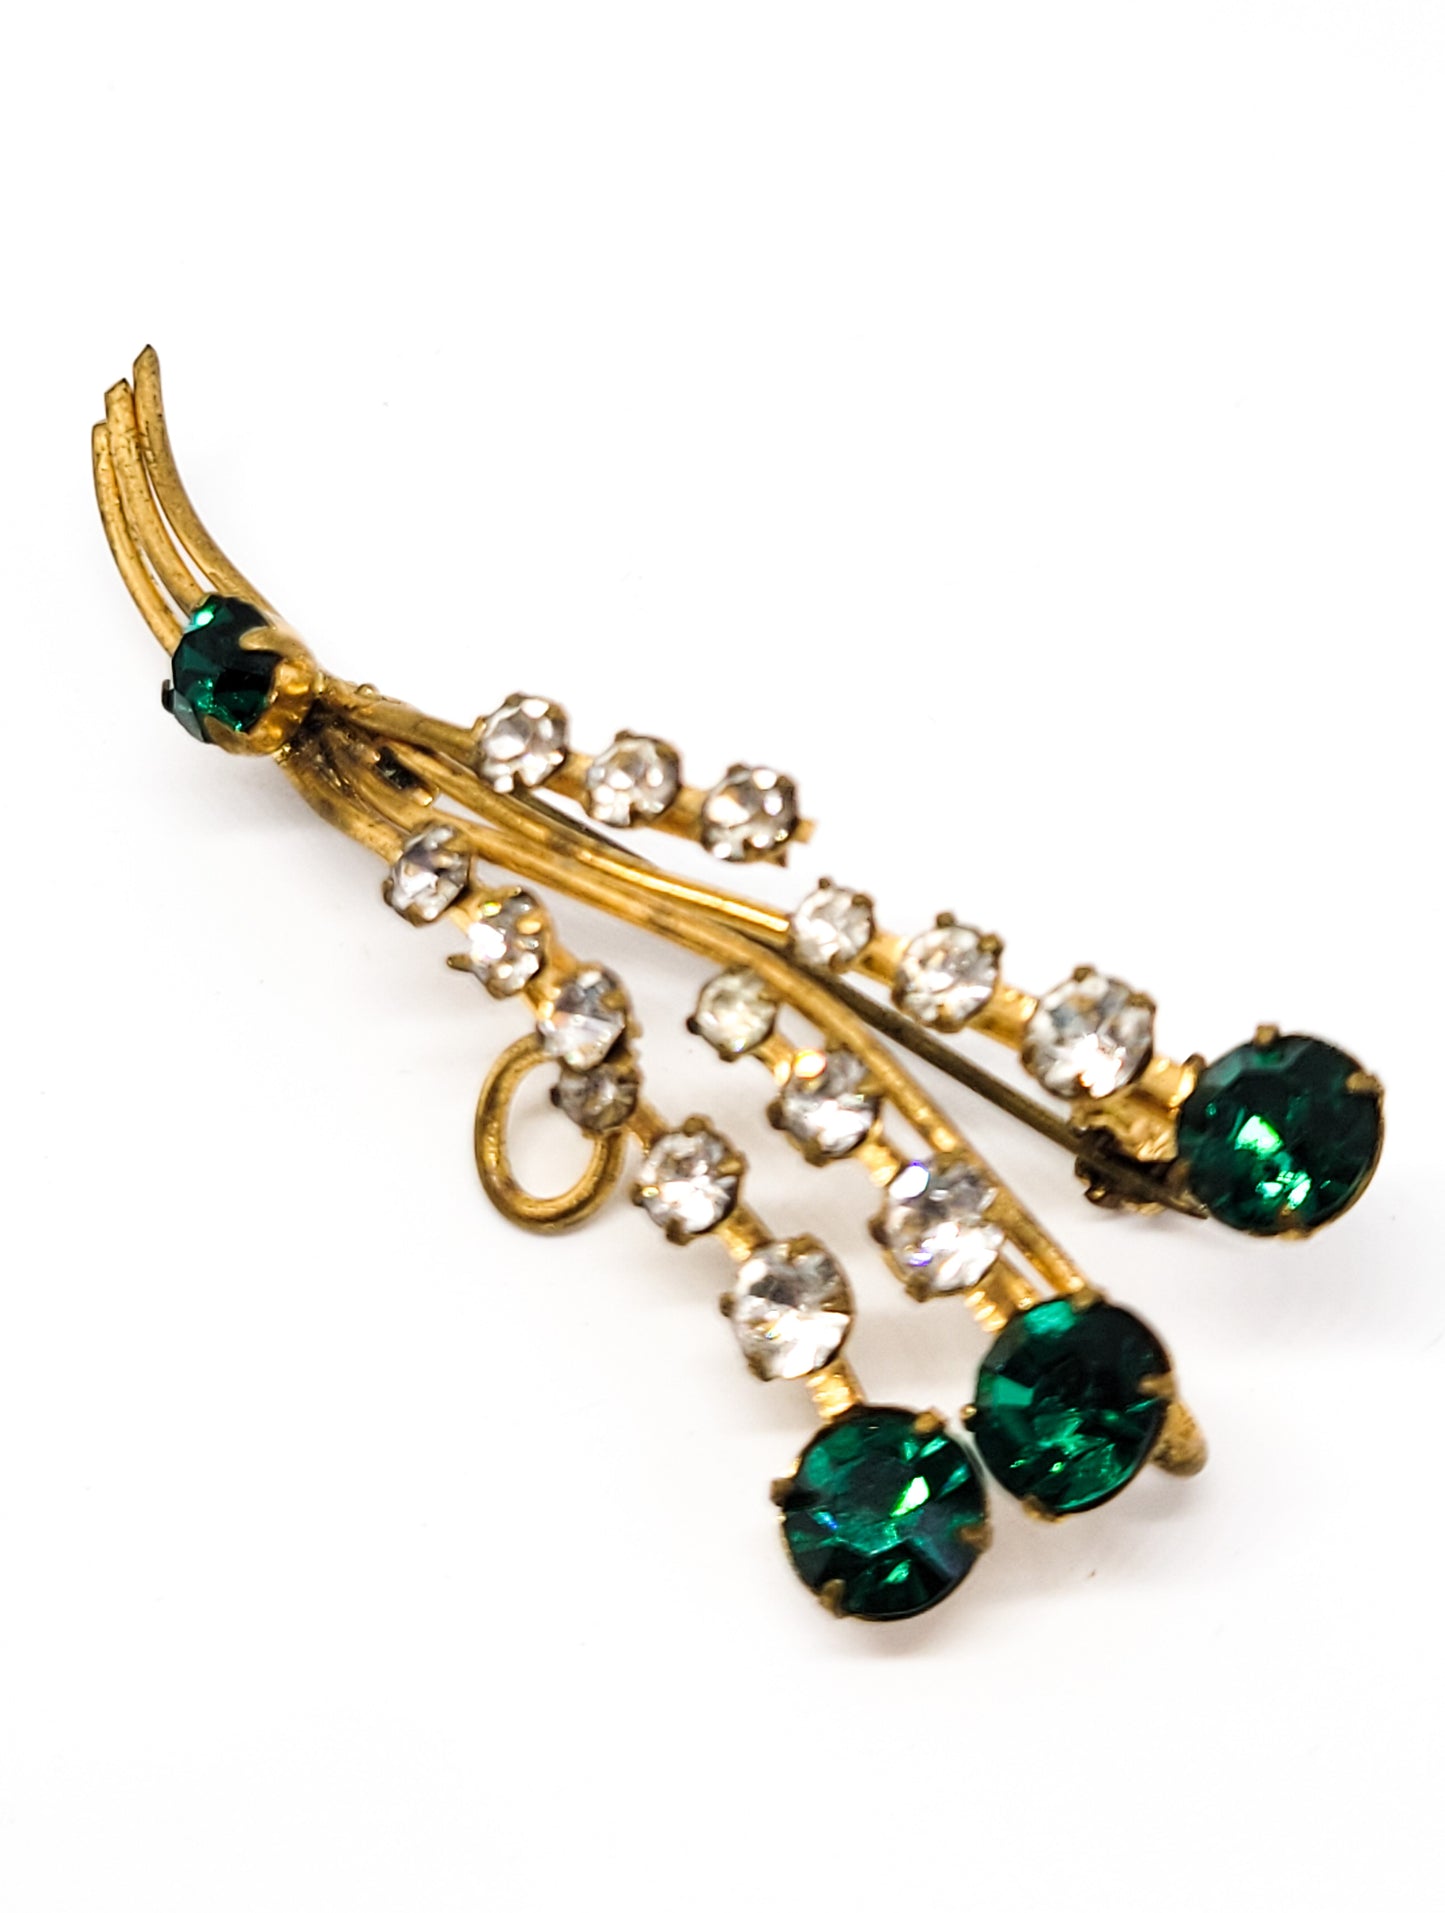 Made in Austrian bright green and clear chaton gold toned vintage mid century brooch